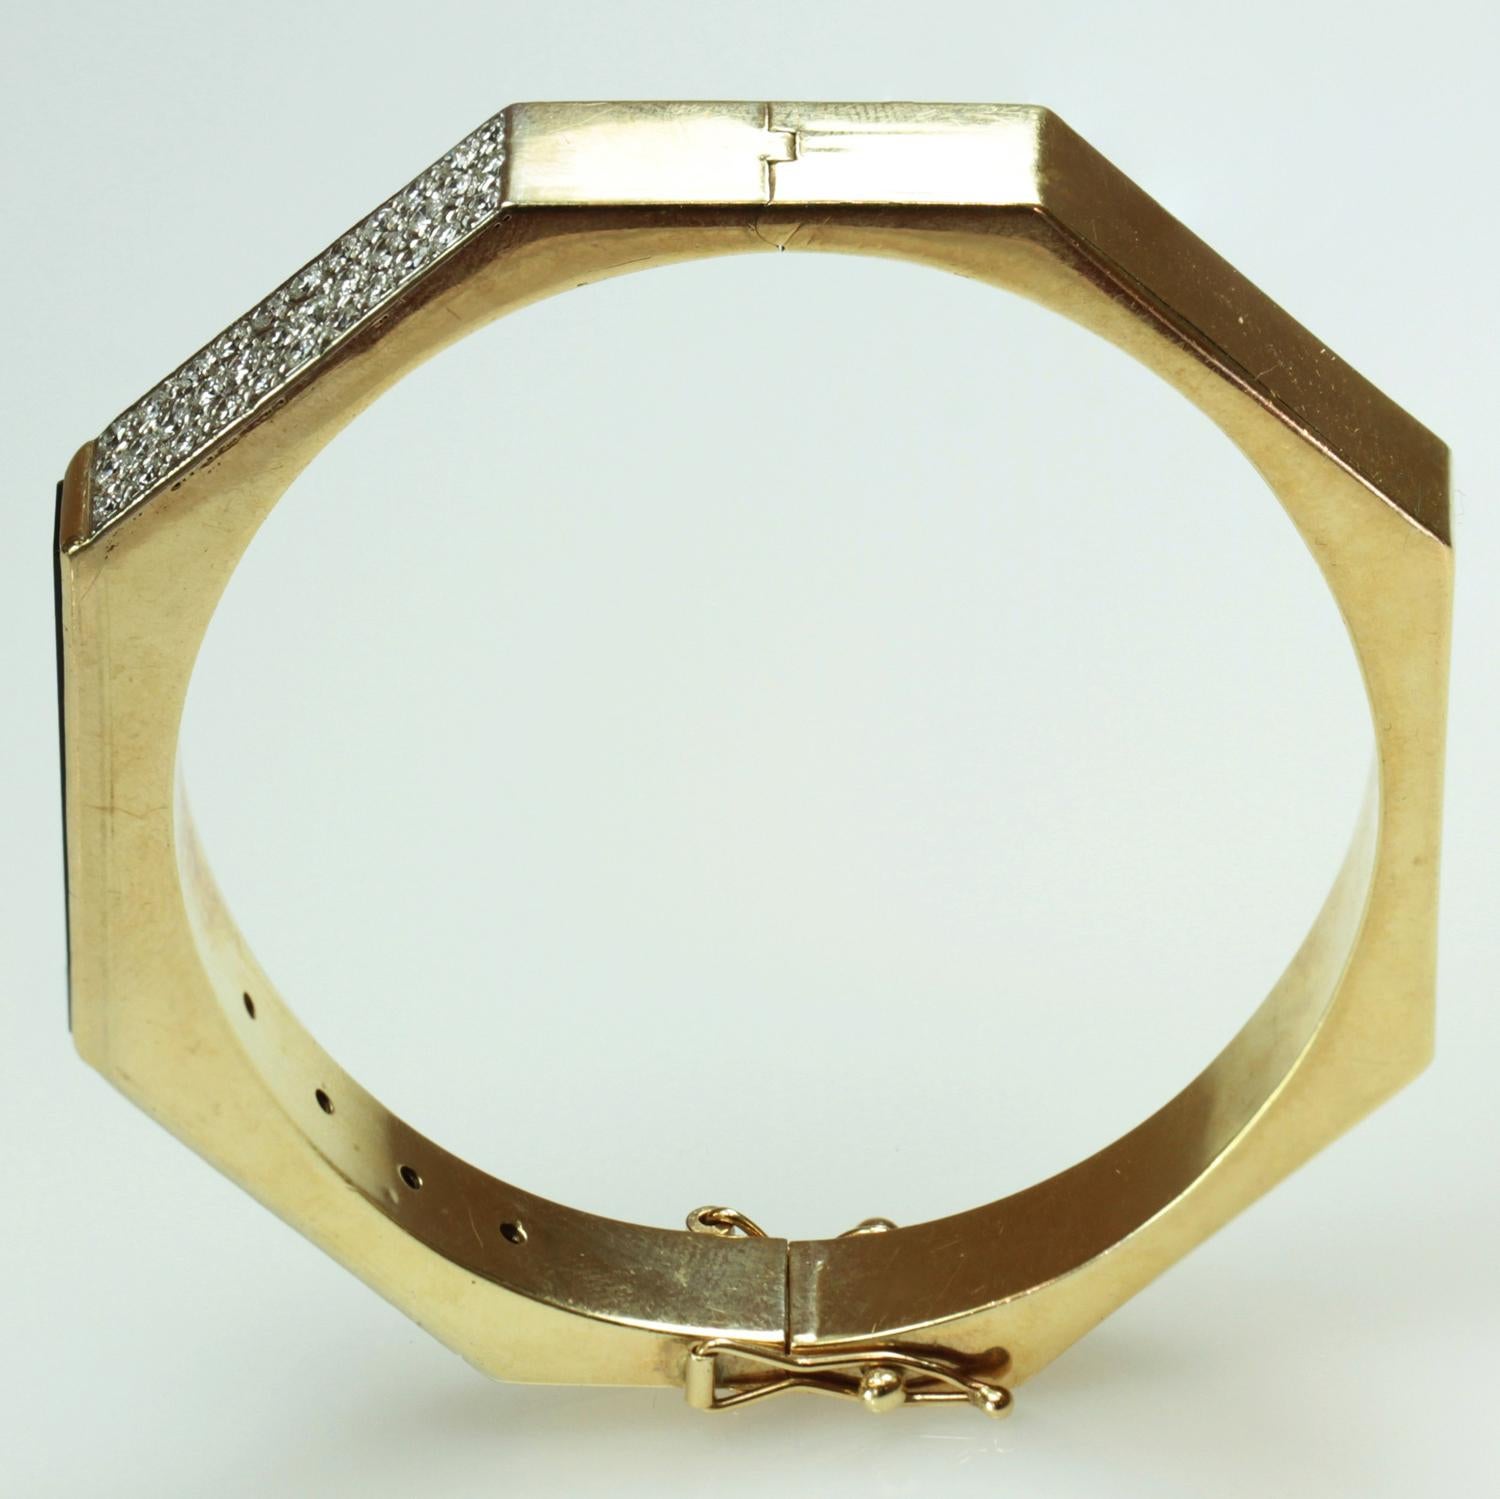 An estate hexagon bangle made in 14k yellow gold and featuring rectangular black onyx inlays and 68 pave-set round diamonds. The bracelet is completed by 2 safety catches. A very stylish design. Measurements: 0.27